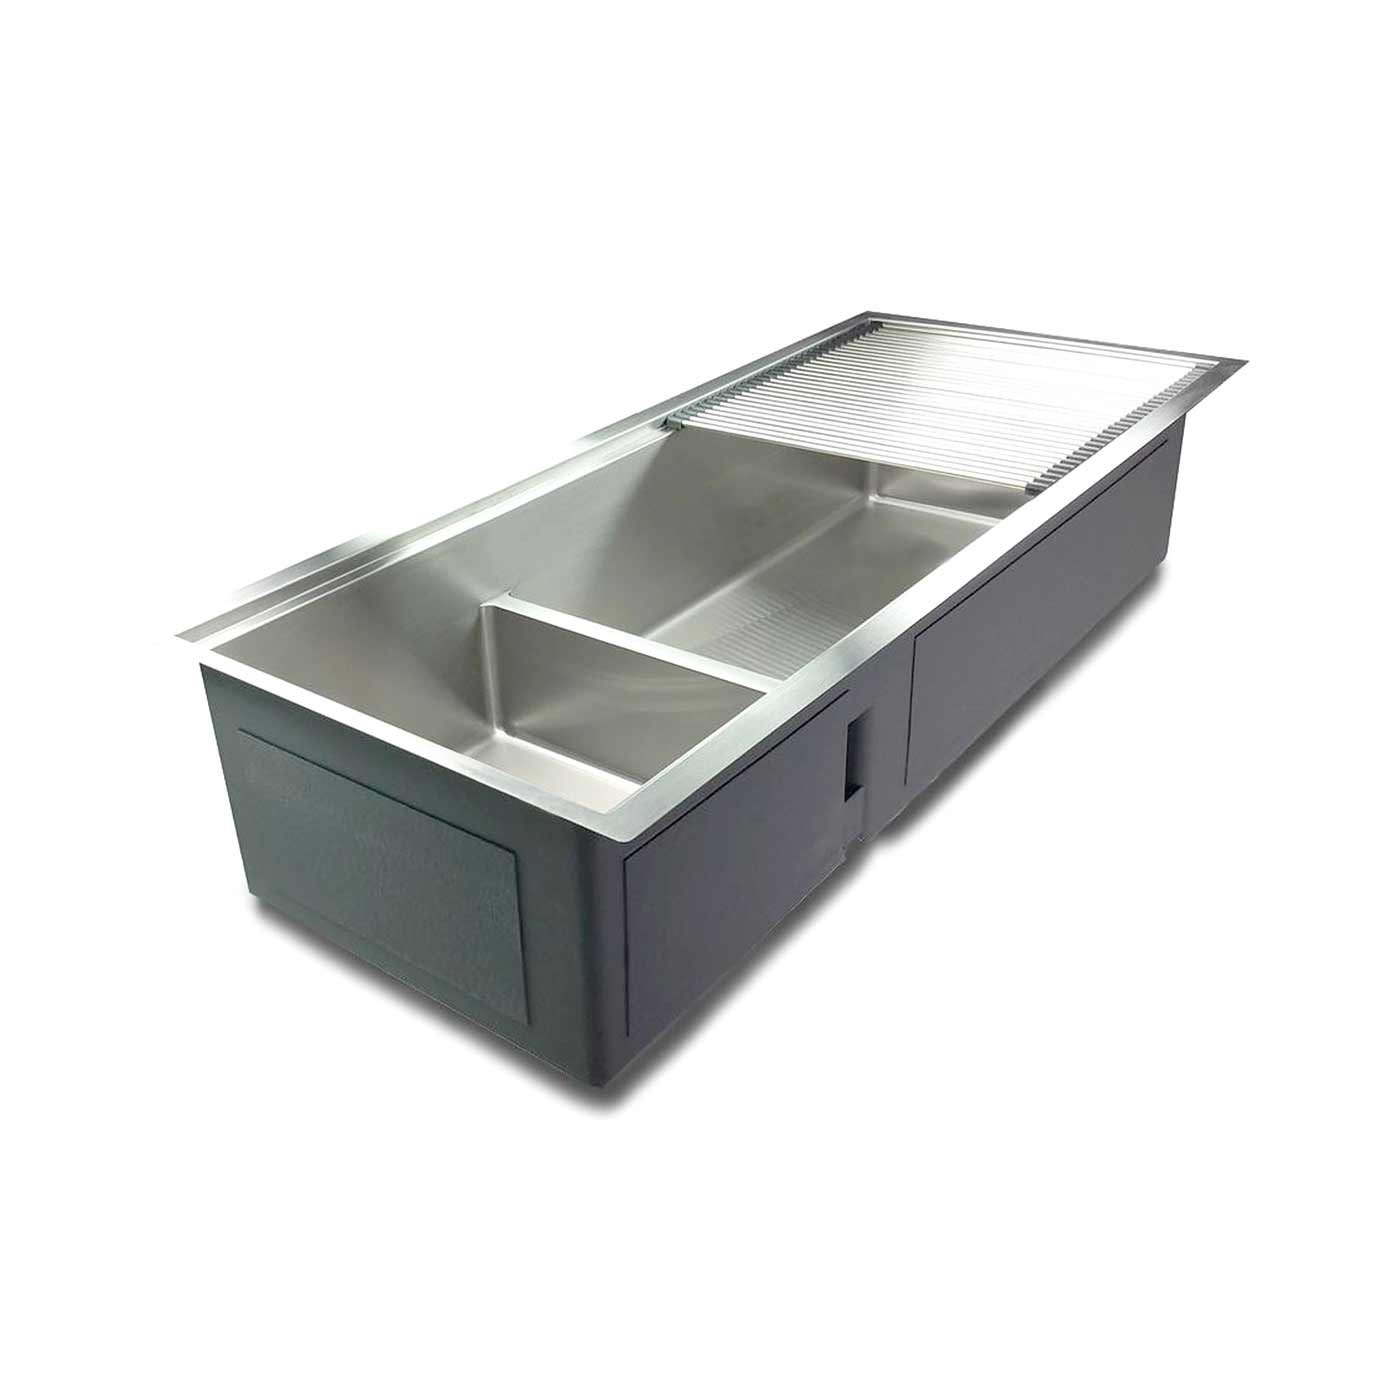 Large 46 inch undermount workstation sink with double bowl and ledge for accessories and smart low divide for dual basins